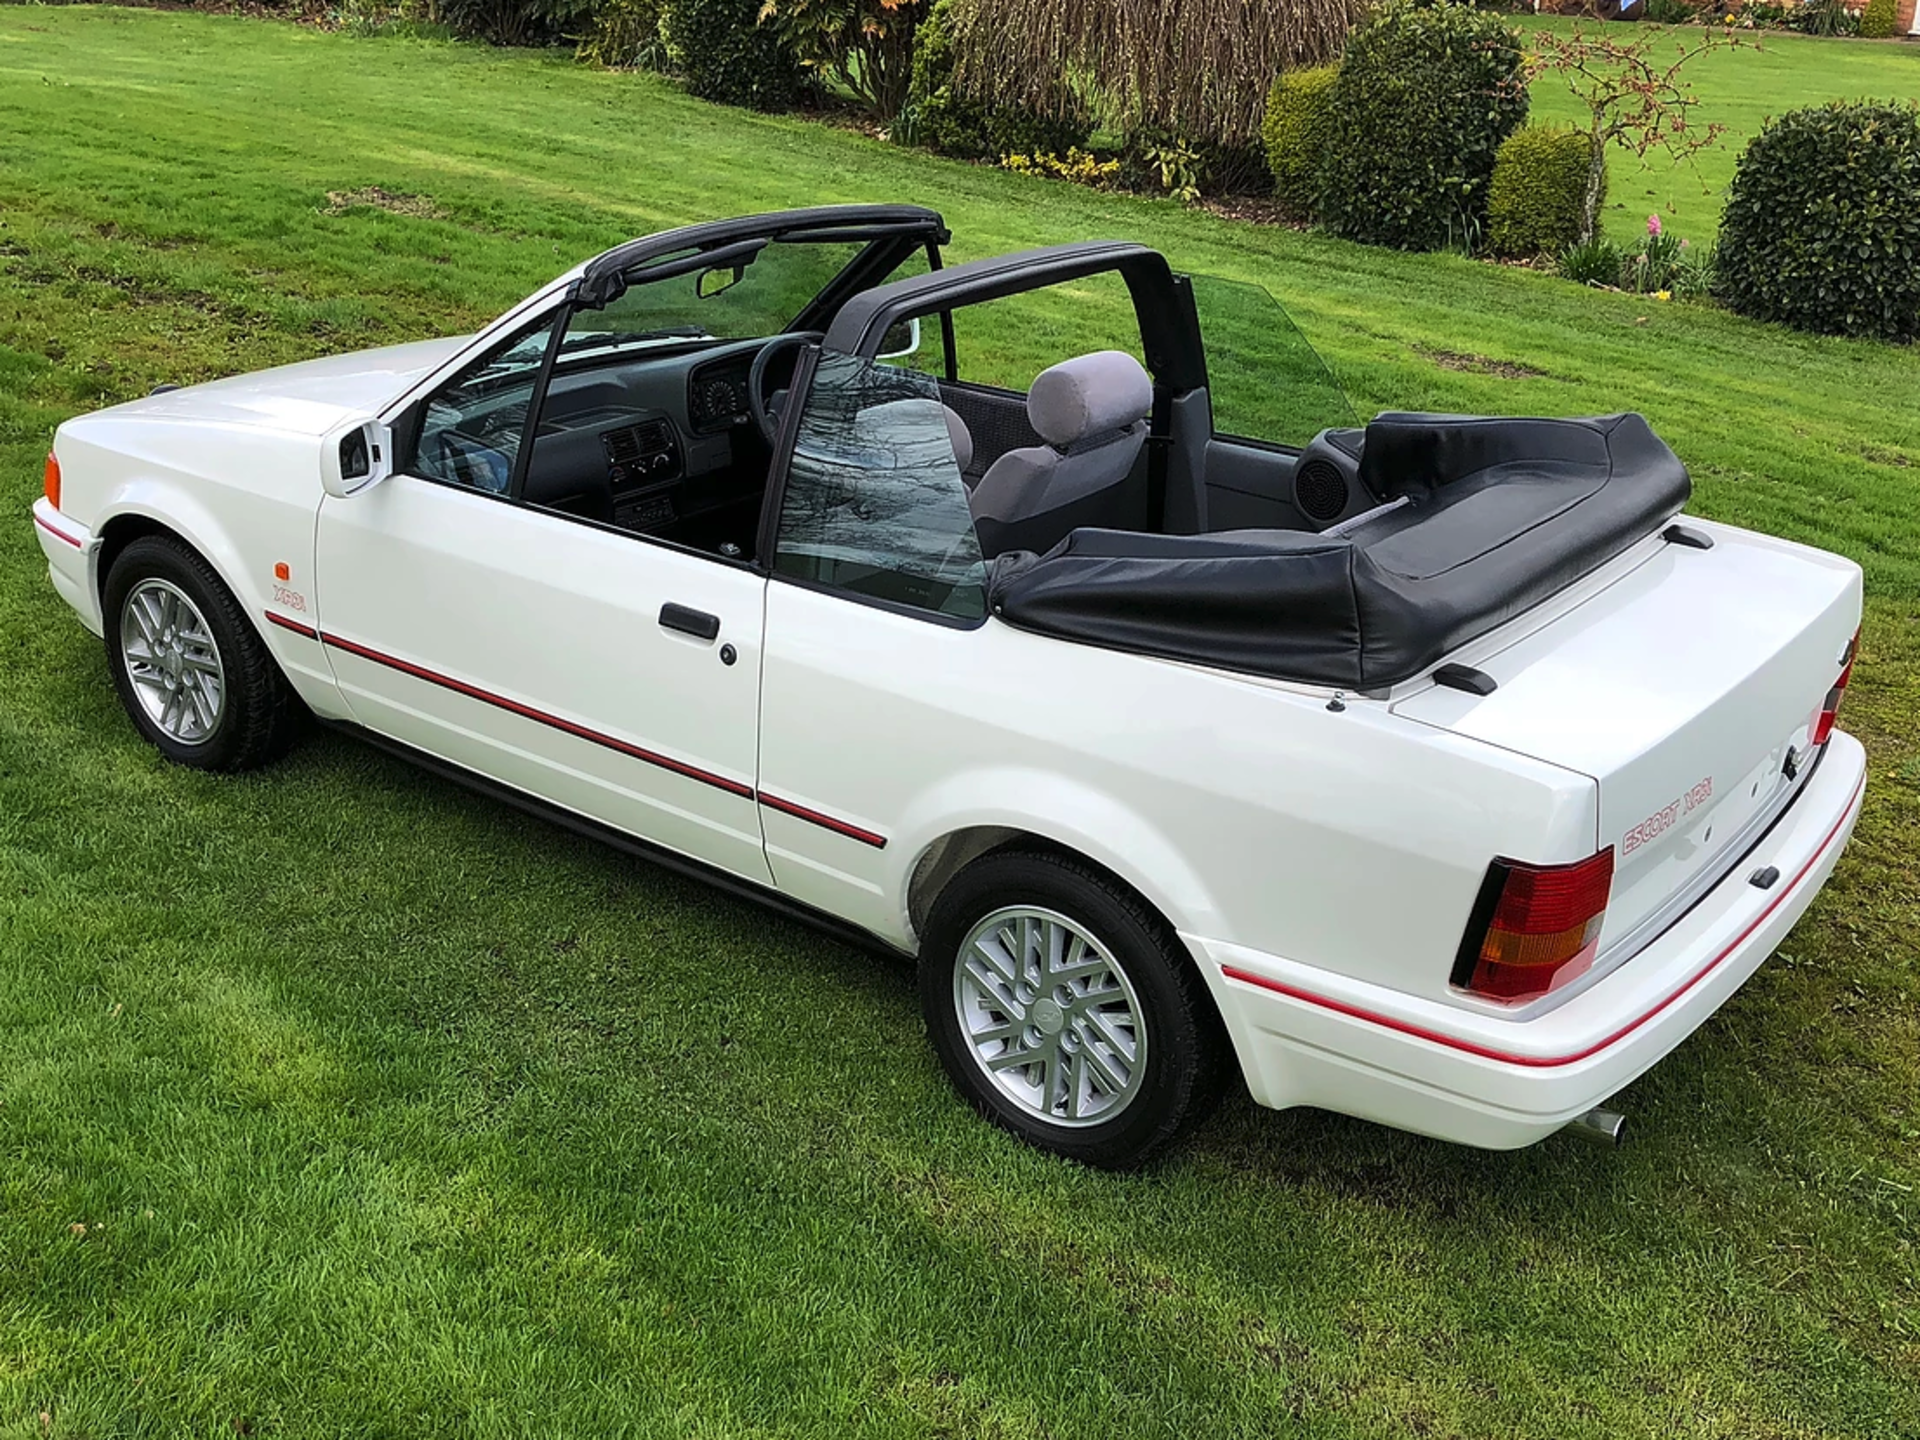 1990 Ford Escort XR3i Convertible - Concours Condition - Image 3 of 12